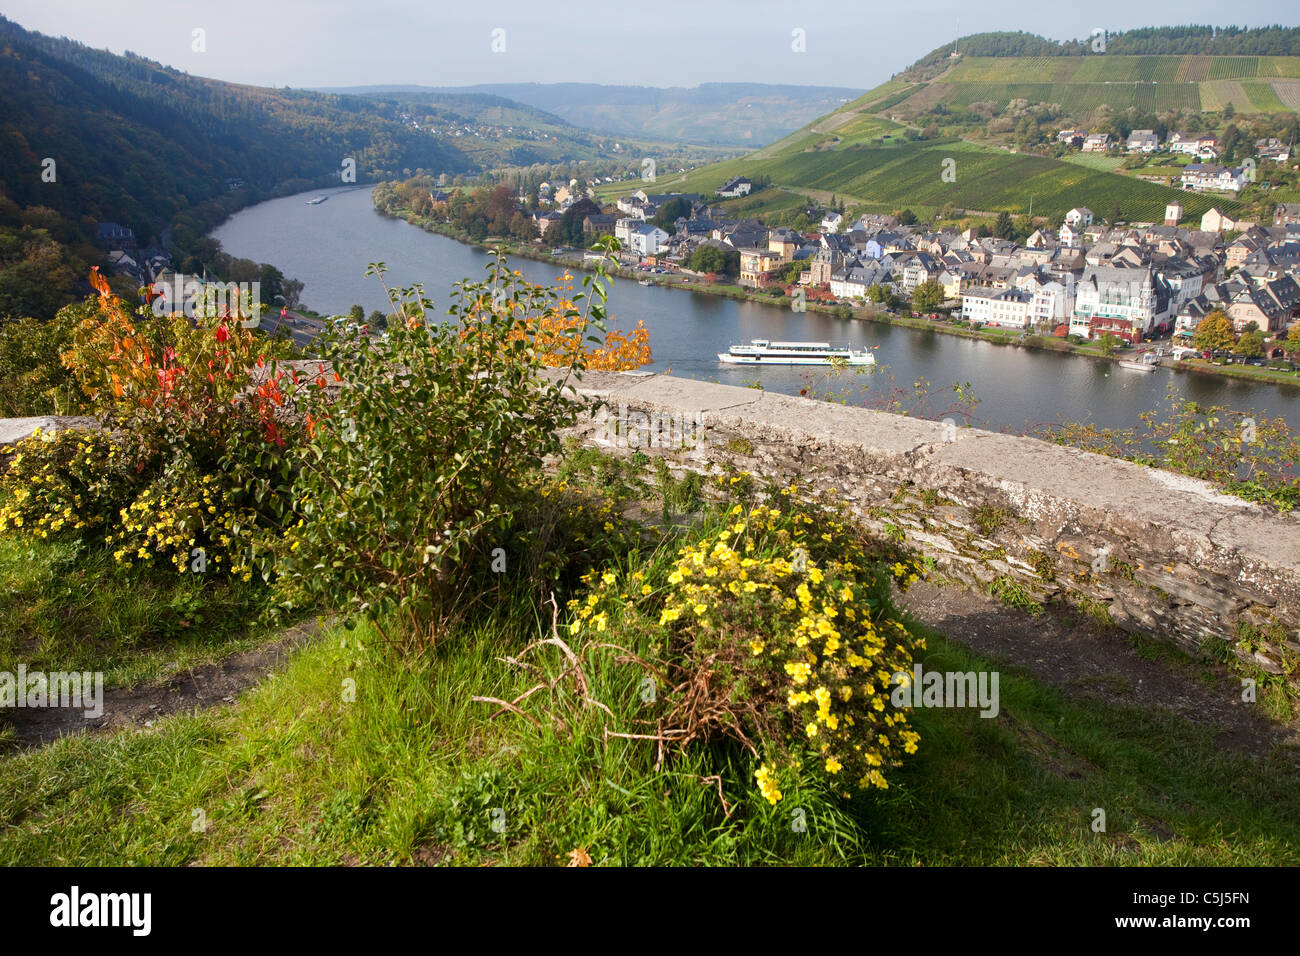 Die Mosel bei Traben-Trarbach, Herbst, Moselle a Traben-Trabach, autunno Foto Stock